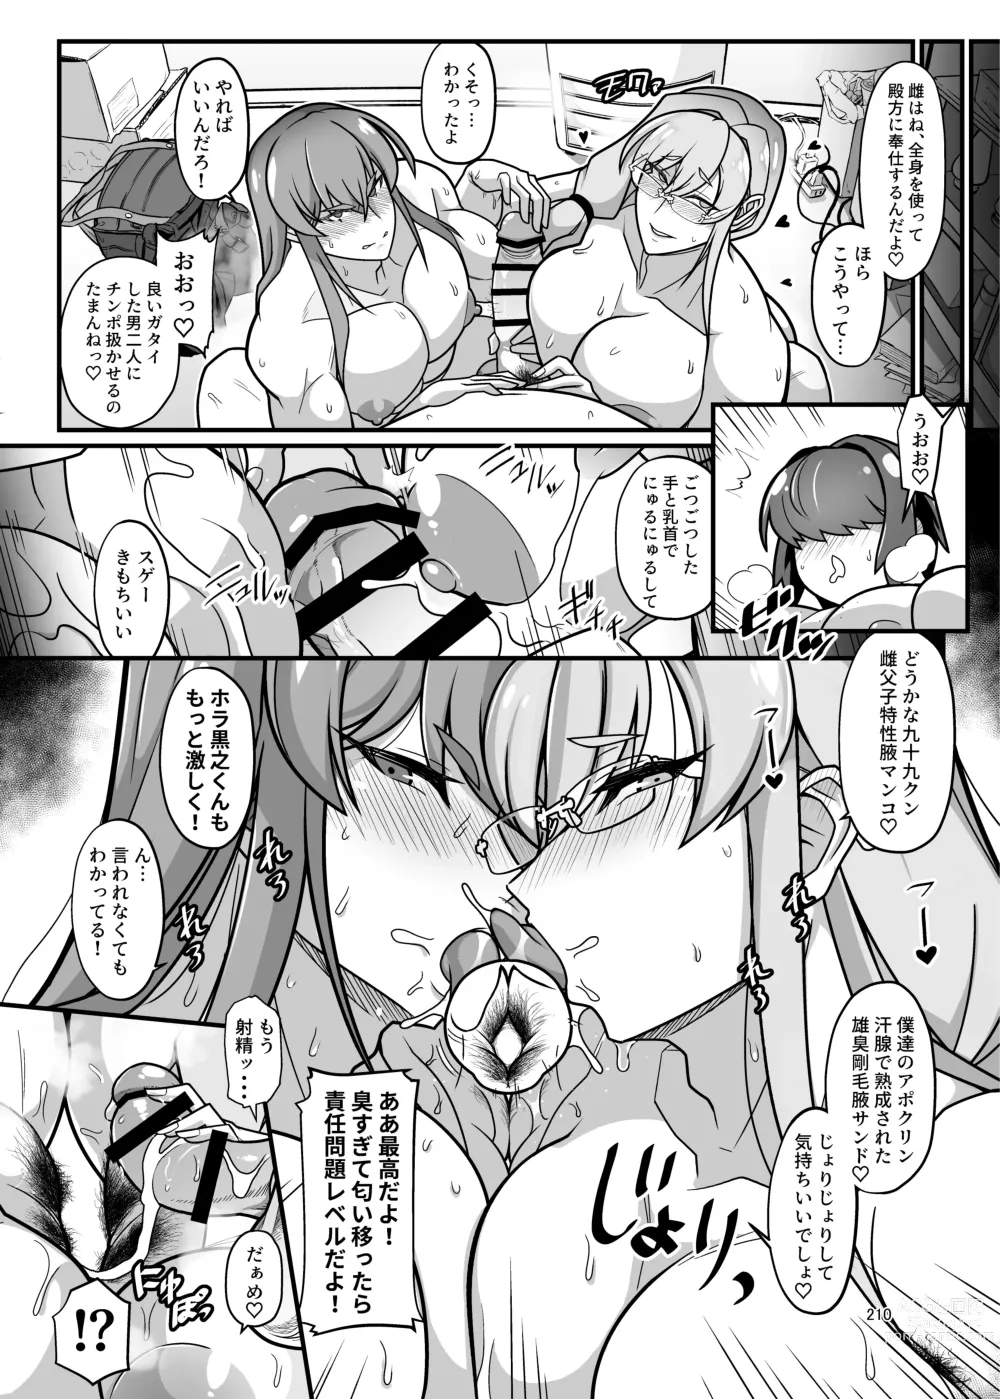 Page 4 of doujinshi Dancing and eating handsome female homo father and son